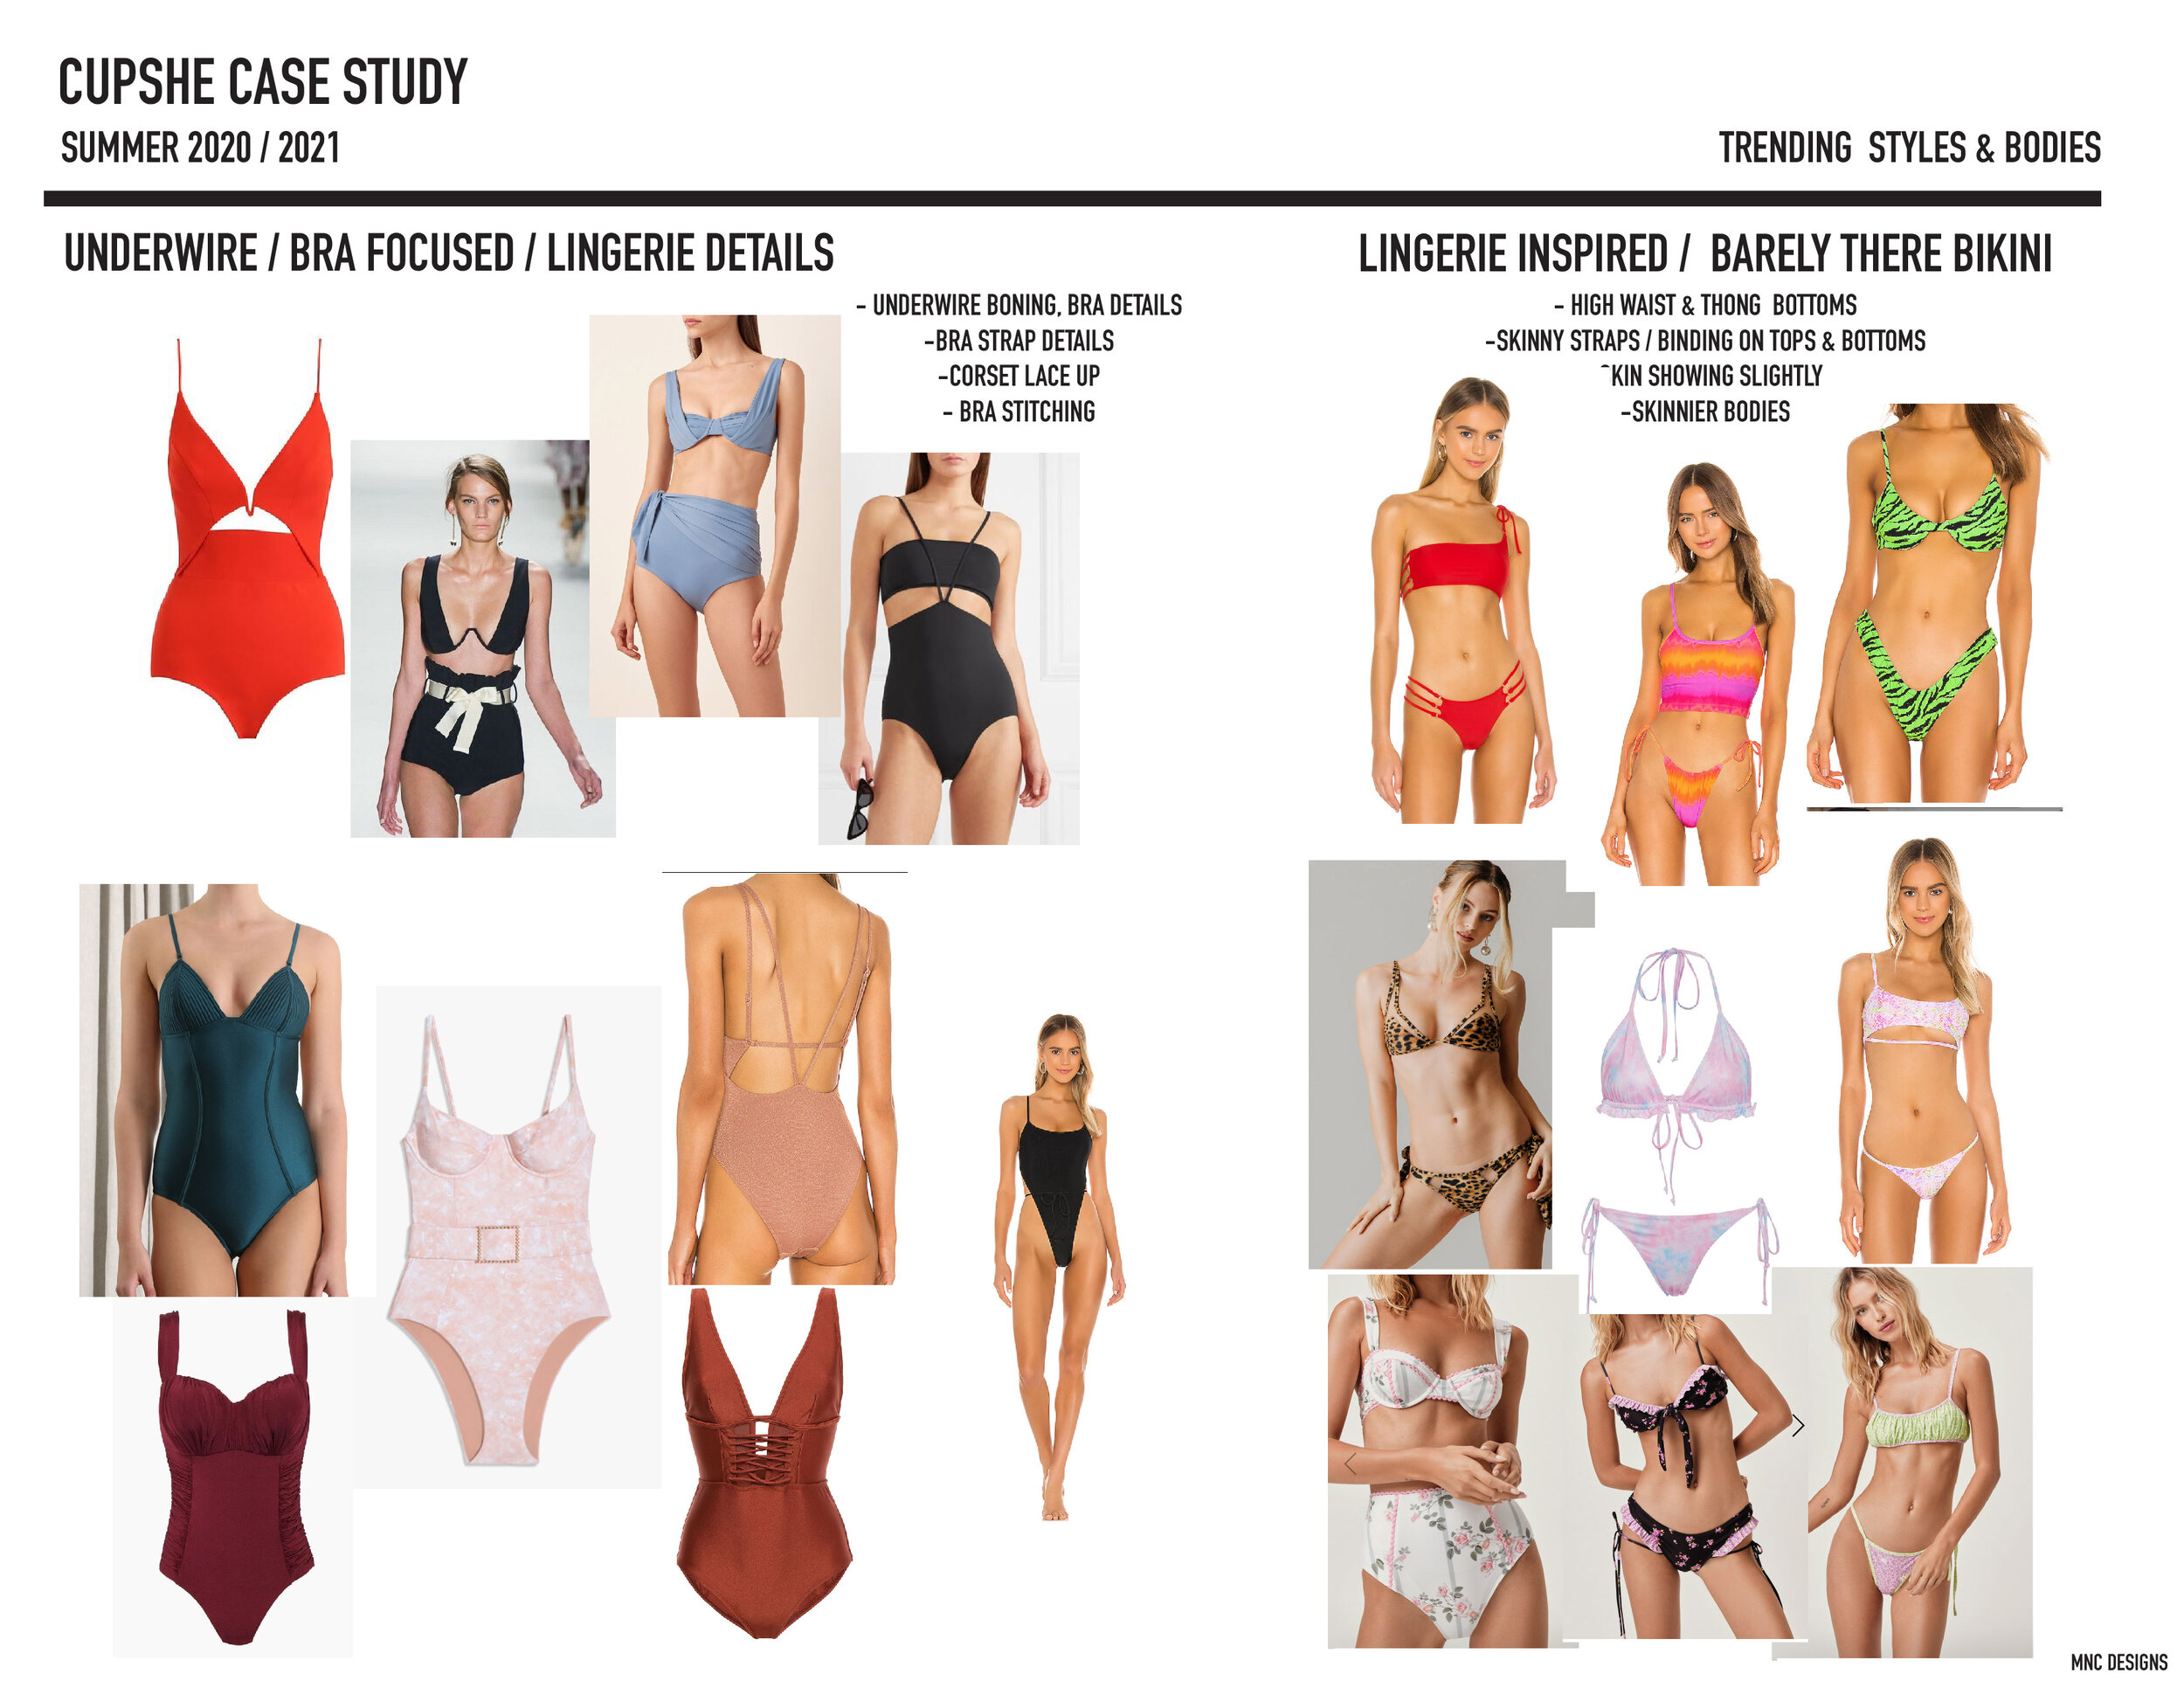 CUPSHE SS20 DESIGN BRIEF CASE STUDY_Page_5.jpg